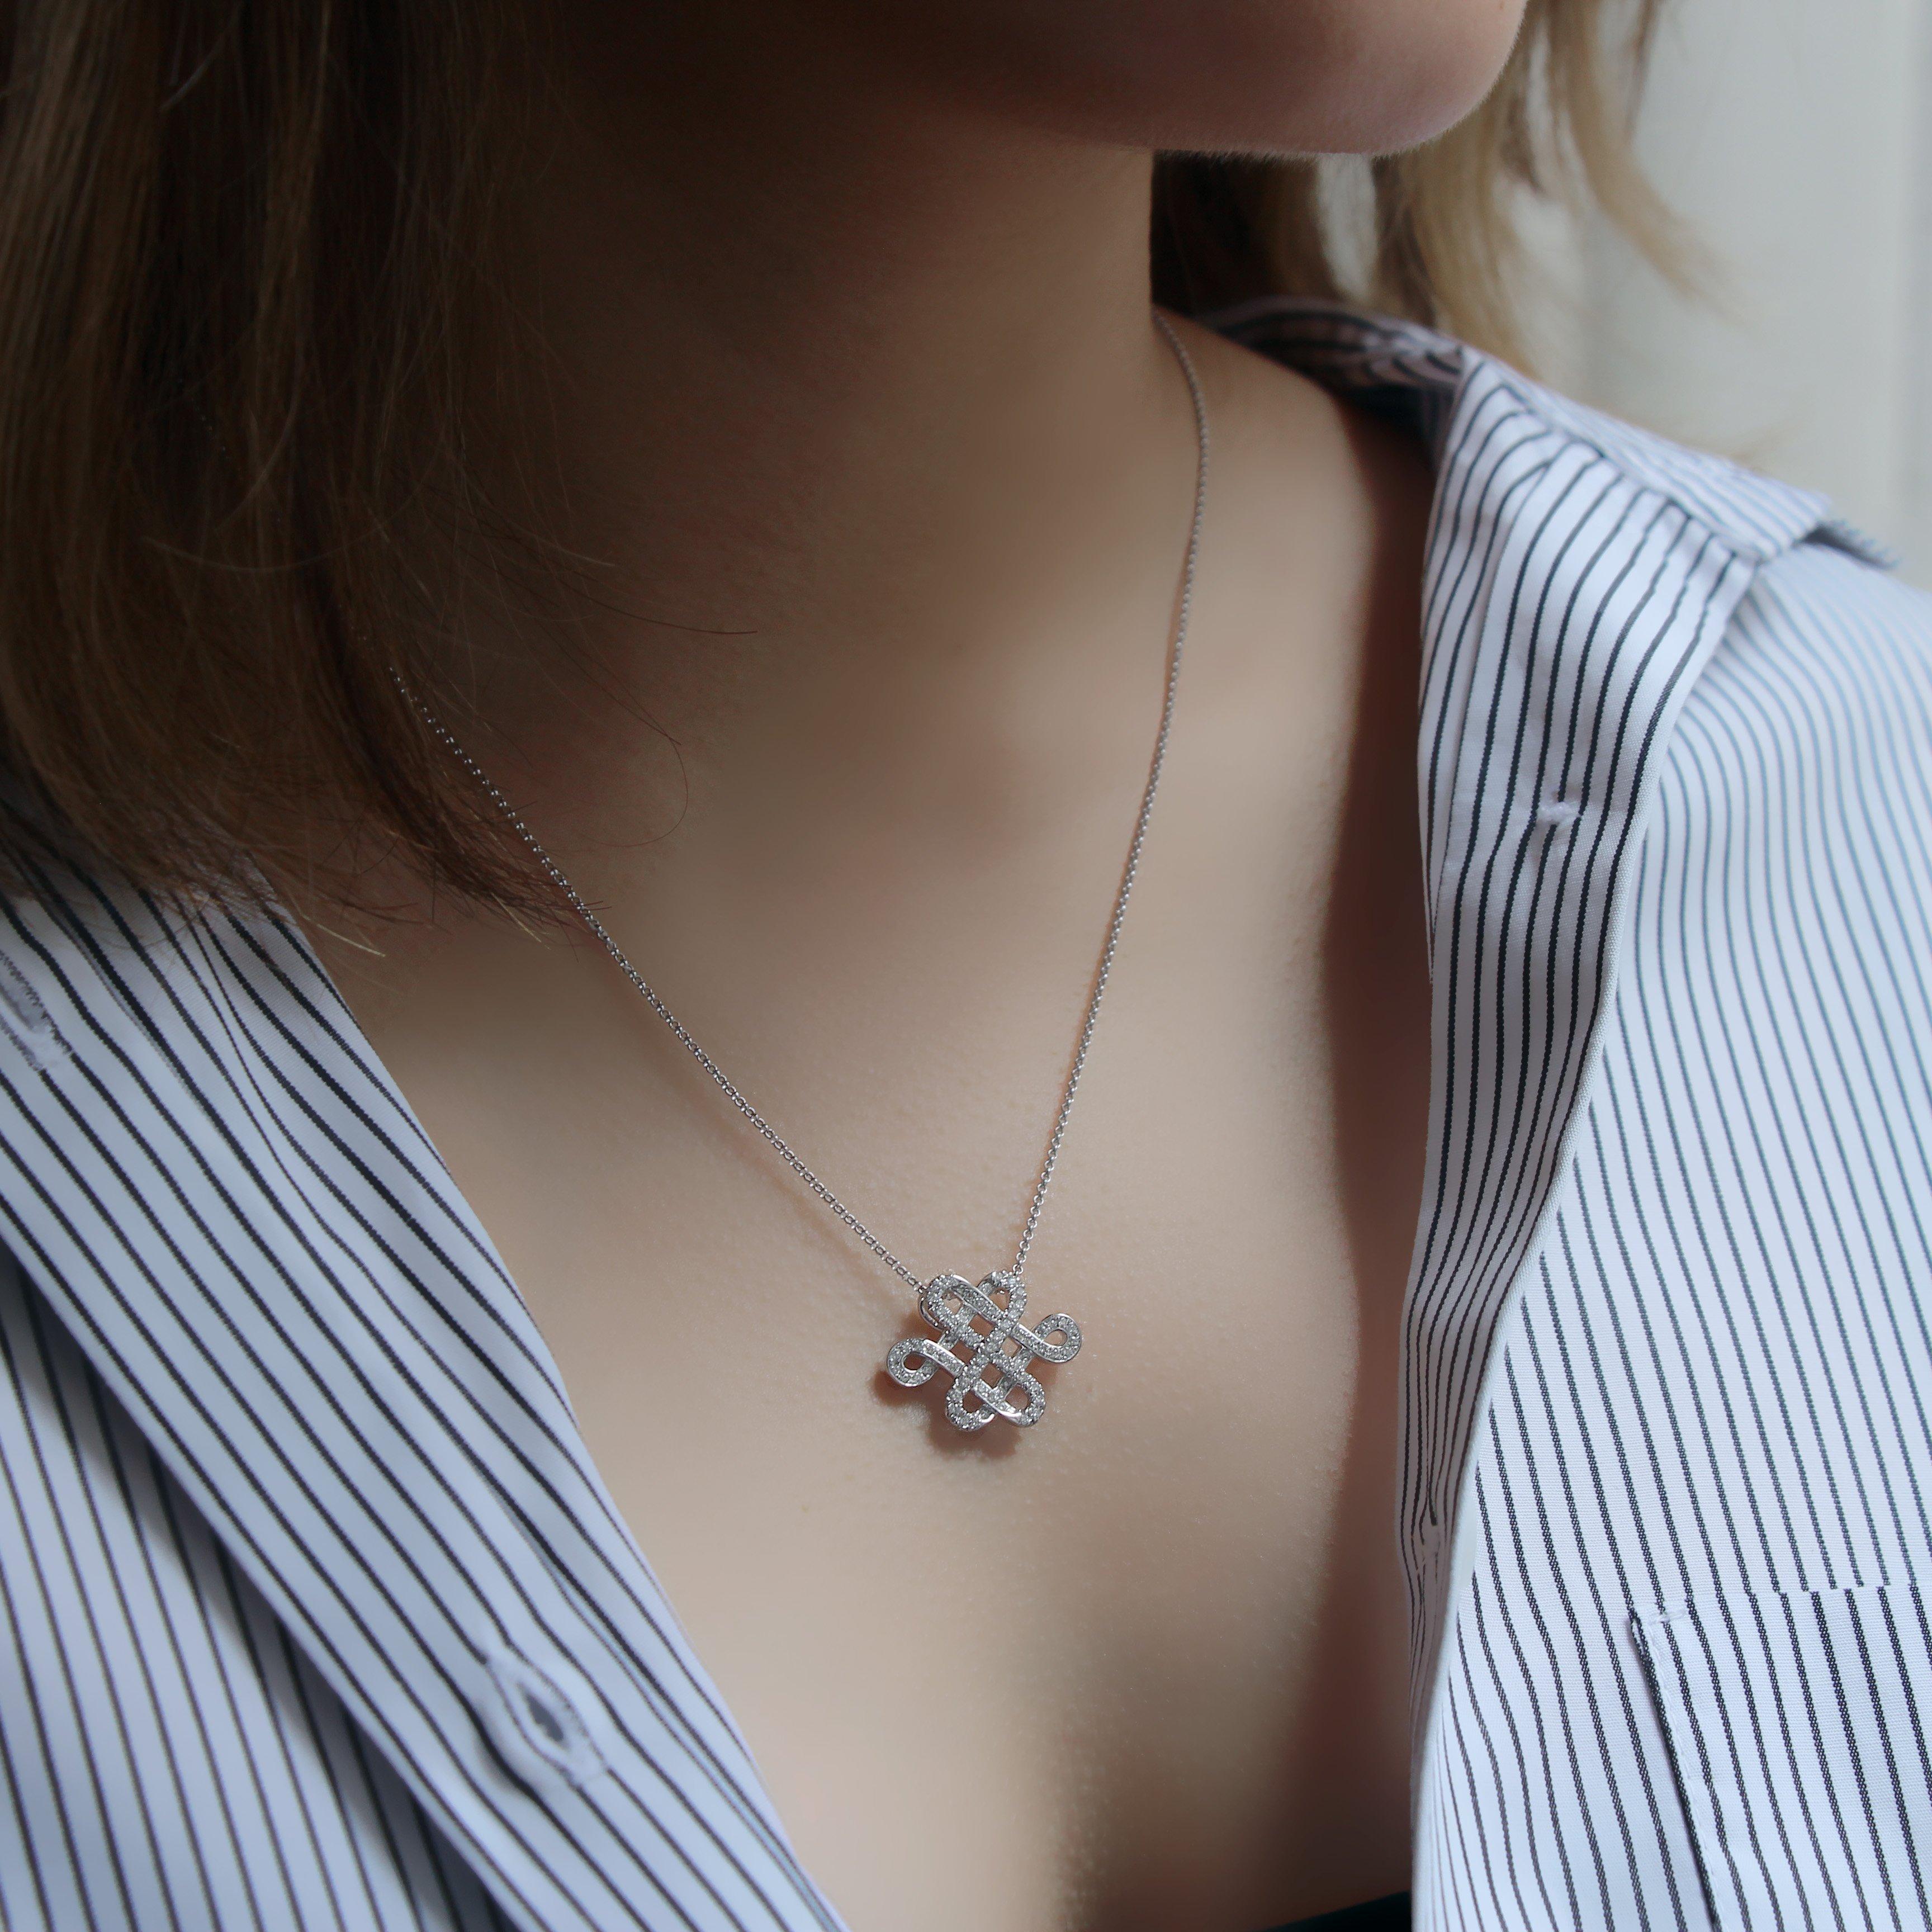 Belonging to the sacred suite of Eight Auspicious Symbols found in Buddhism, the Eternal Knot signifies key aspects of Buddhist teaching - wisdom, compassion and continuity. Inspired by this symbol, the Legacy Eternal Knot Necklace elegantly